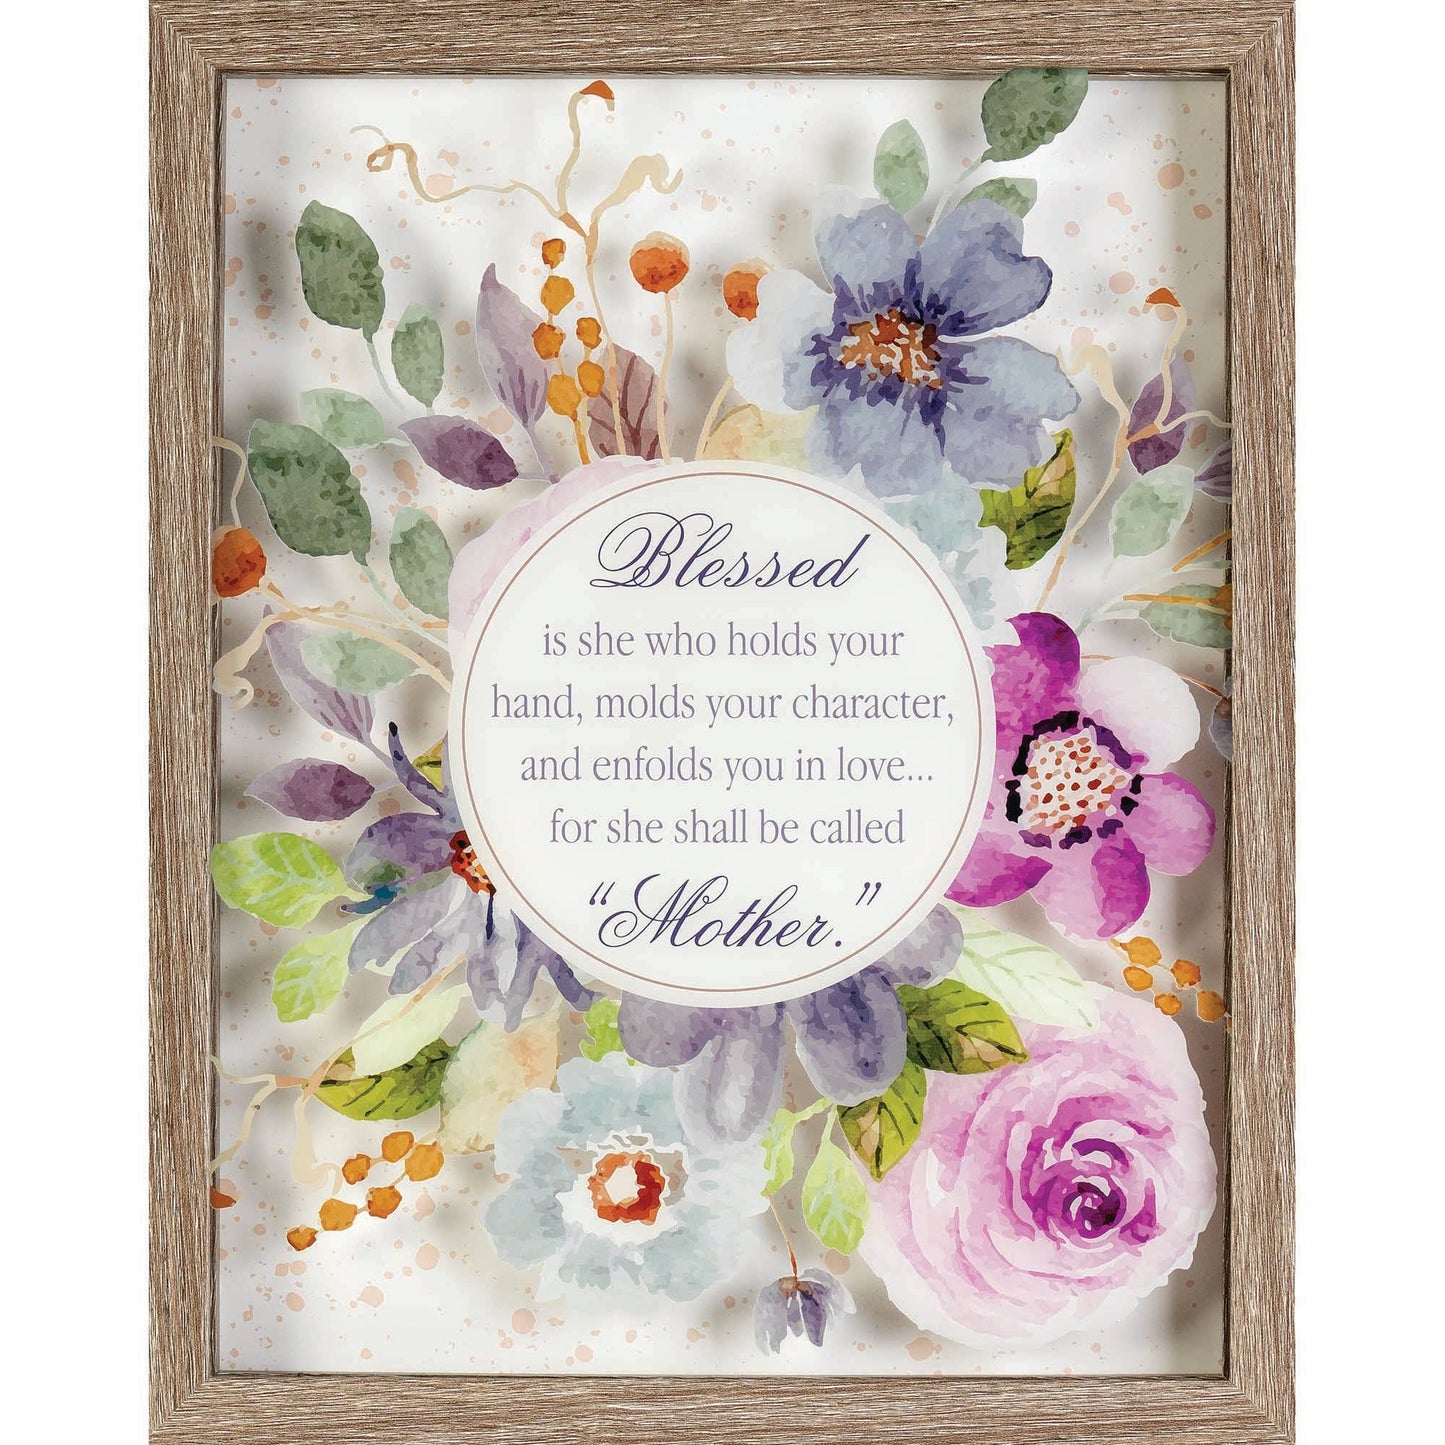 Dicksons - MOTHER BLESSED IS SHE FRAMED WALL DÃƒâ€°COR